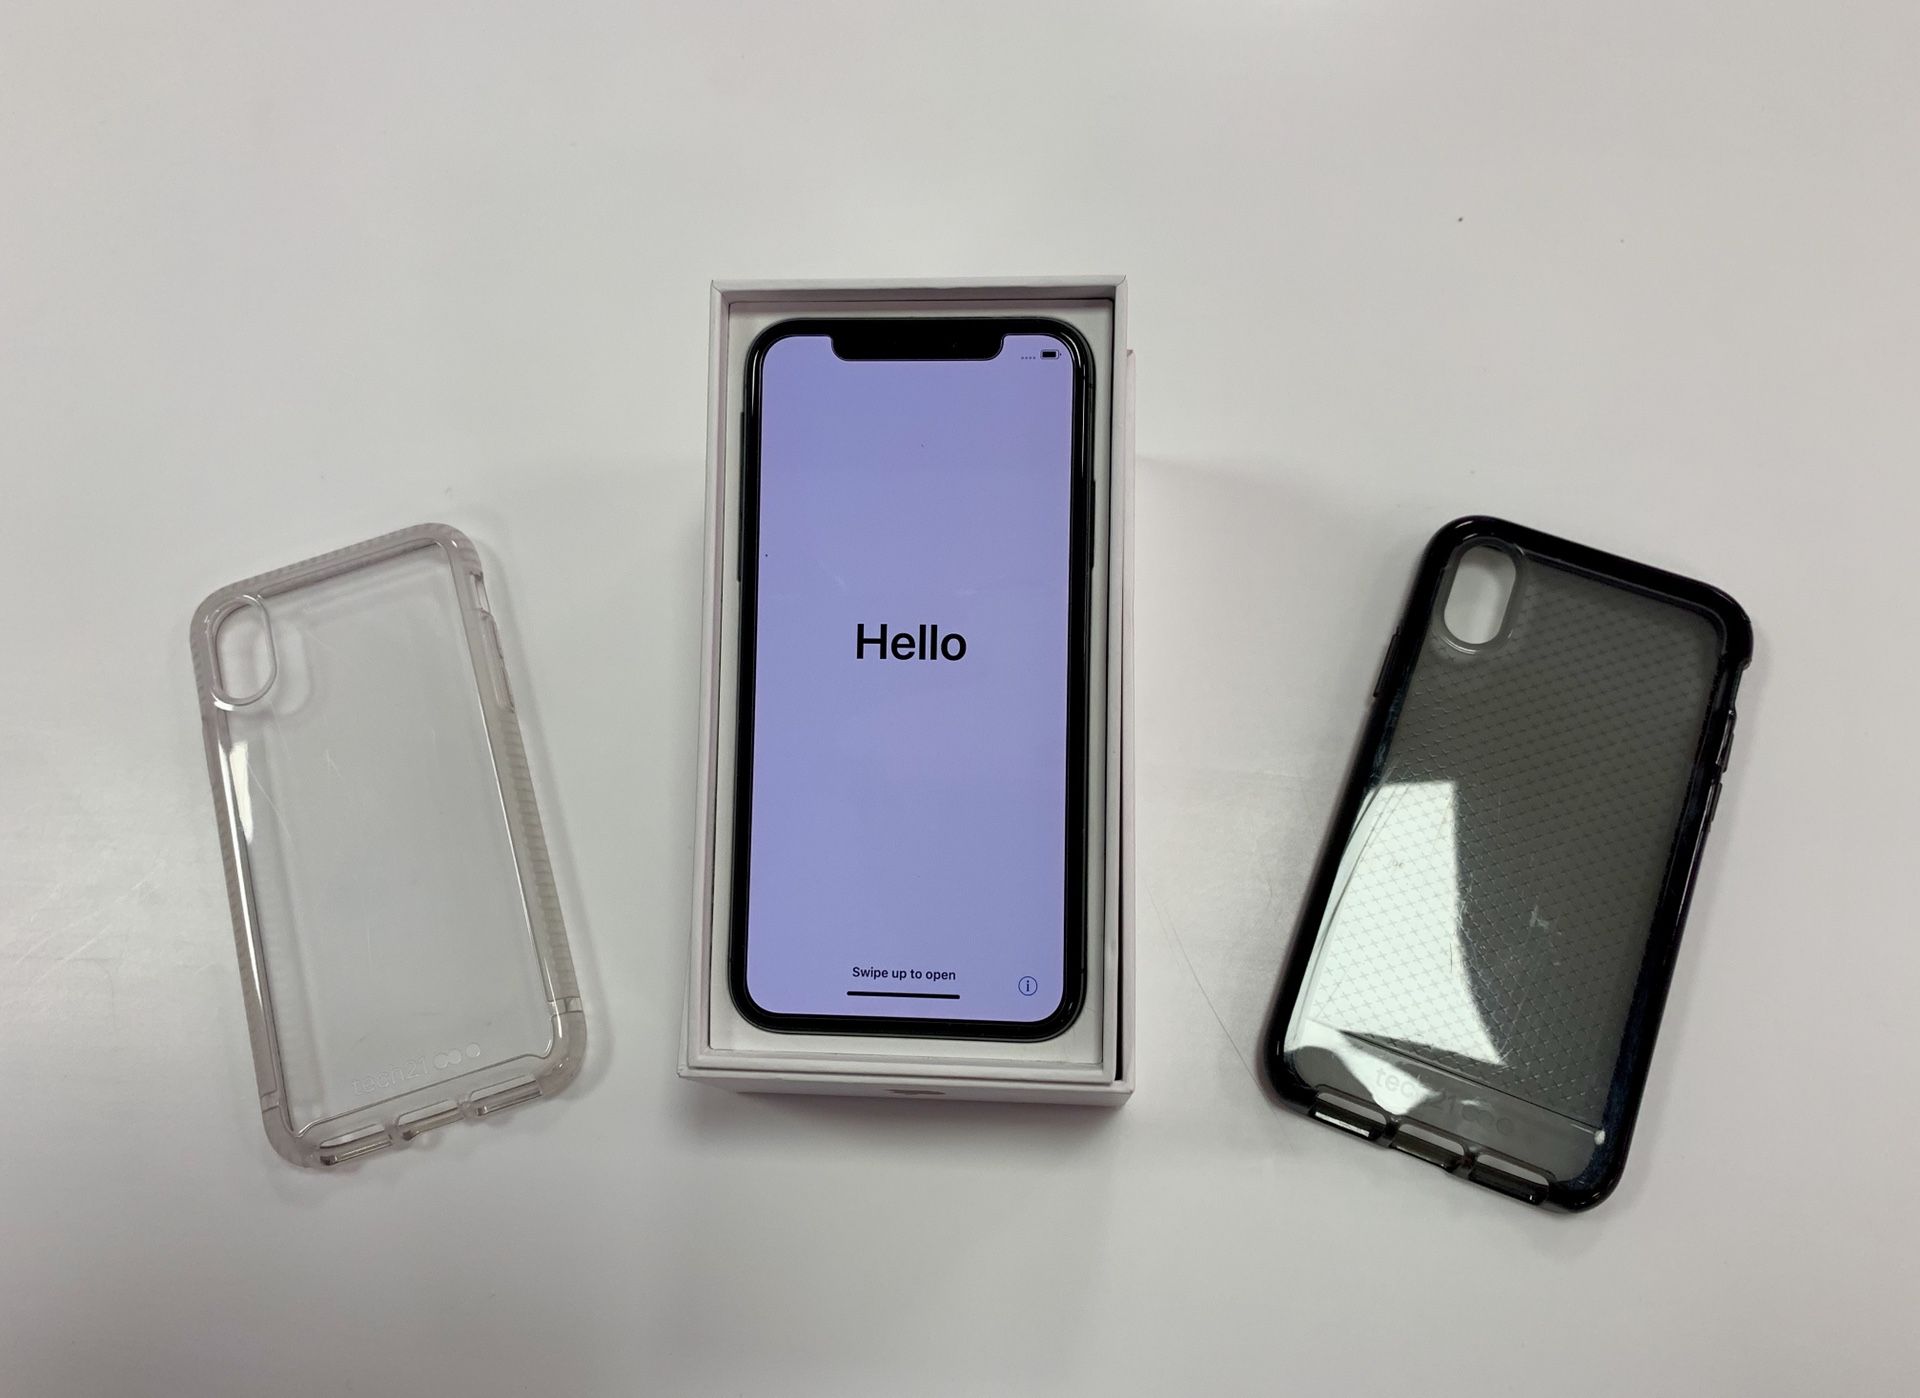 IPHONE X 64GB ( T-Mobile ) with new cases and glass screen protector